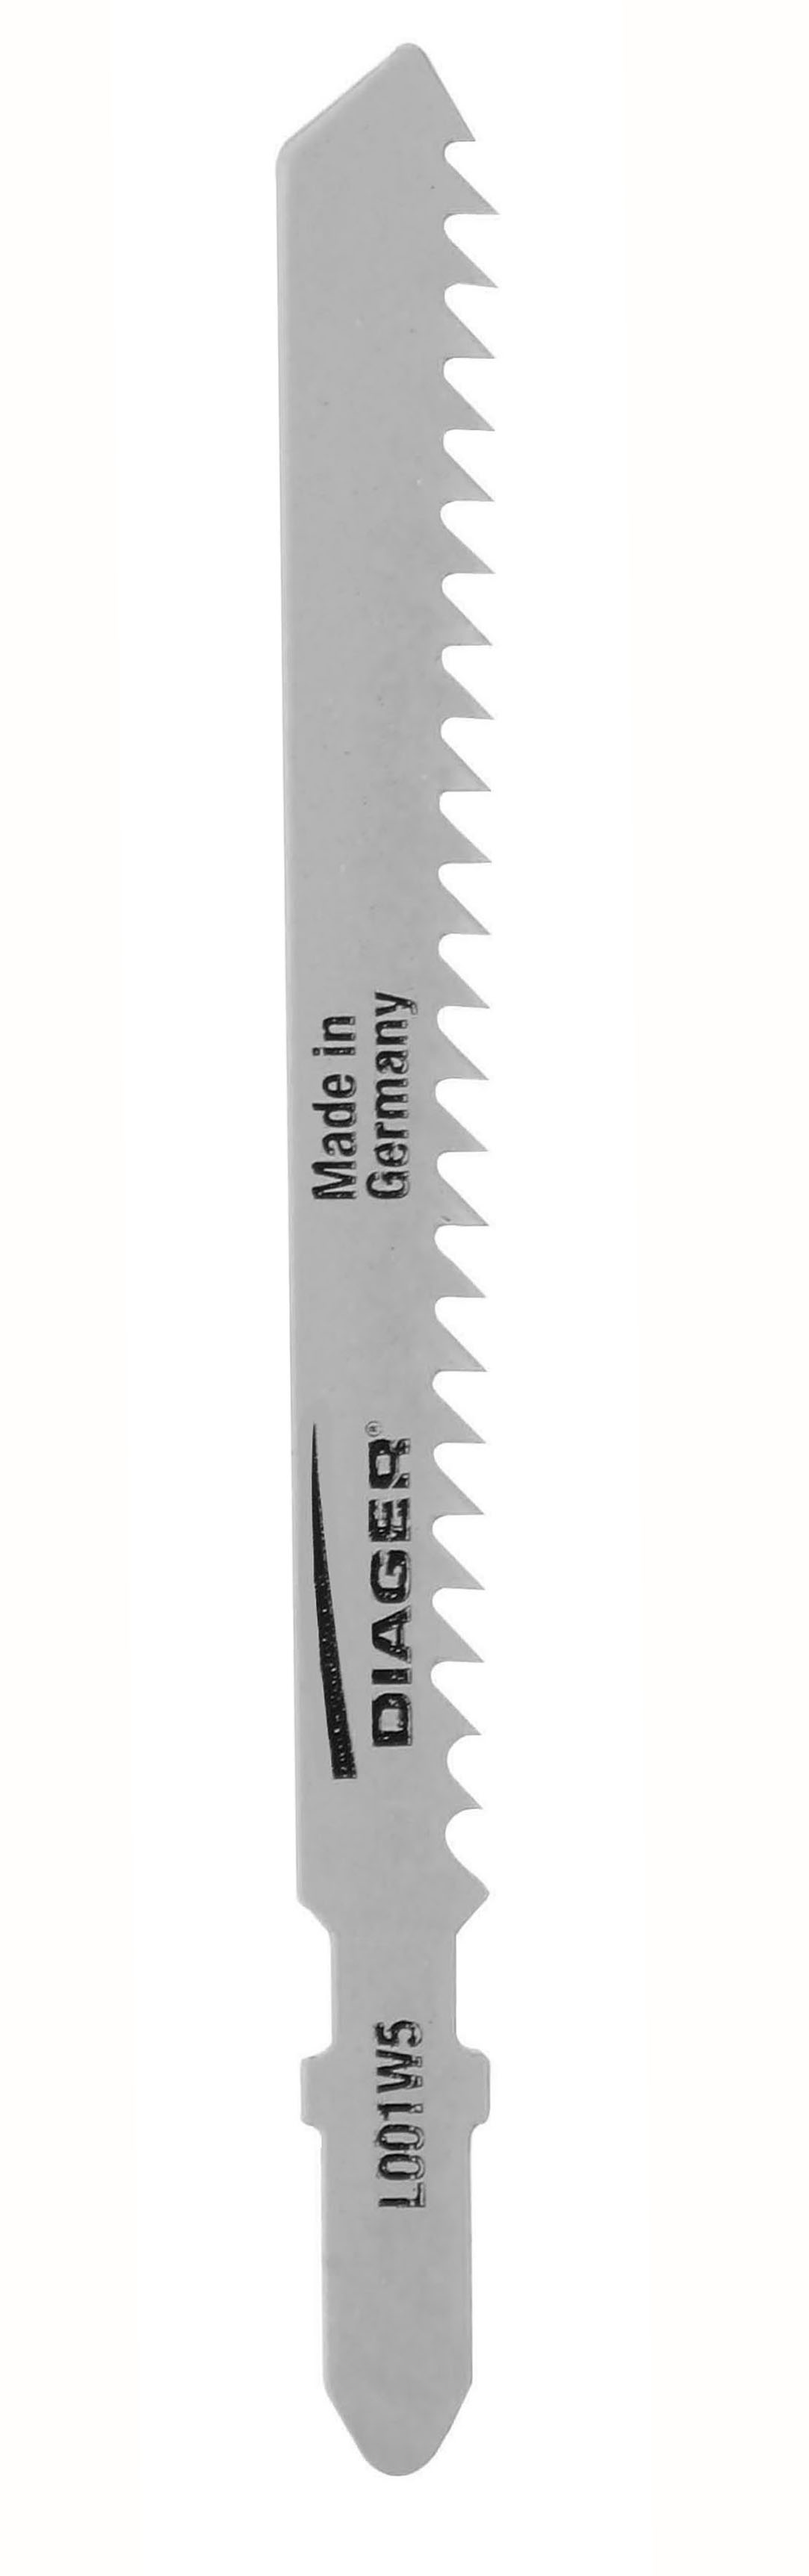 Sawing Wood and plastic 4-50 mm Jigsaw blade for fast cutting - L001W.jpg